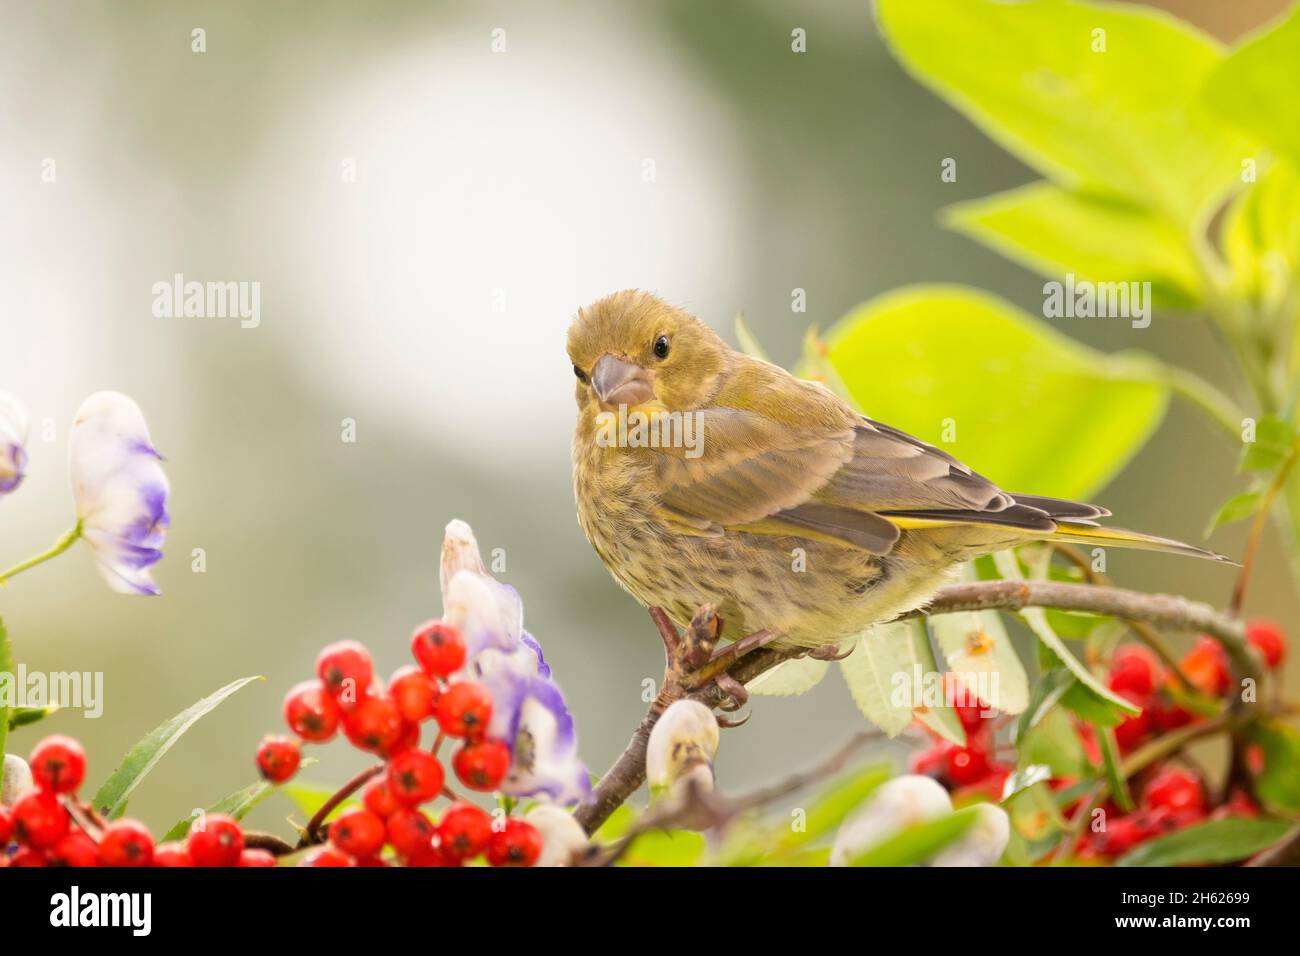 green finch is standing between berries and flowers Stock Photo